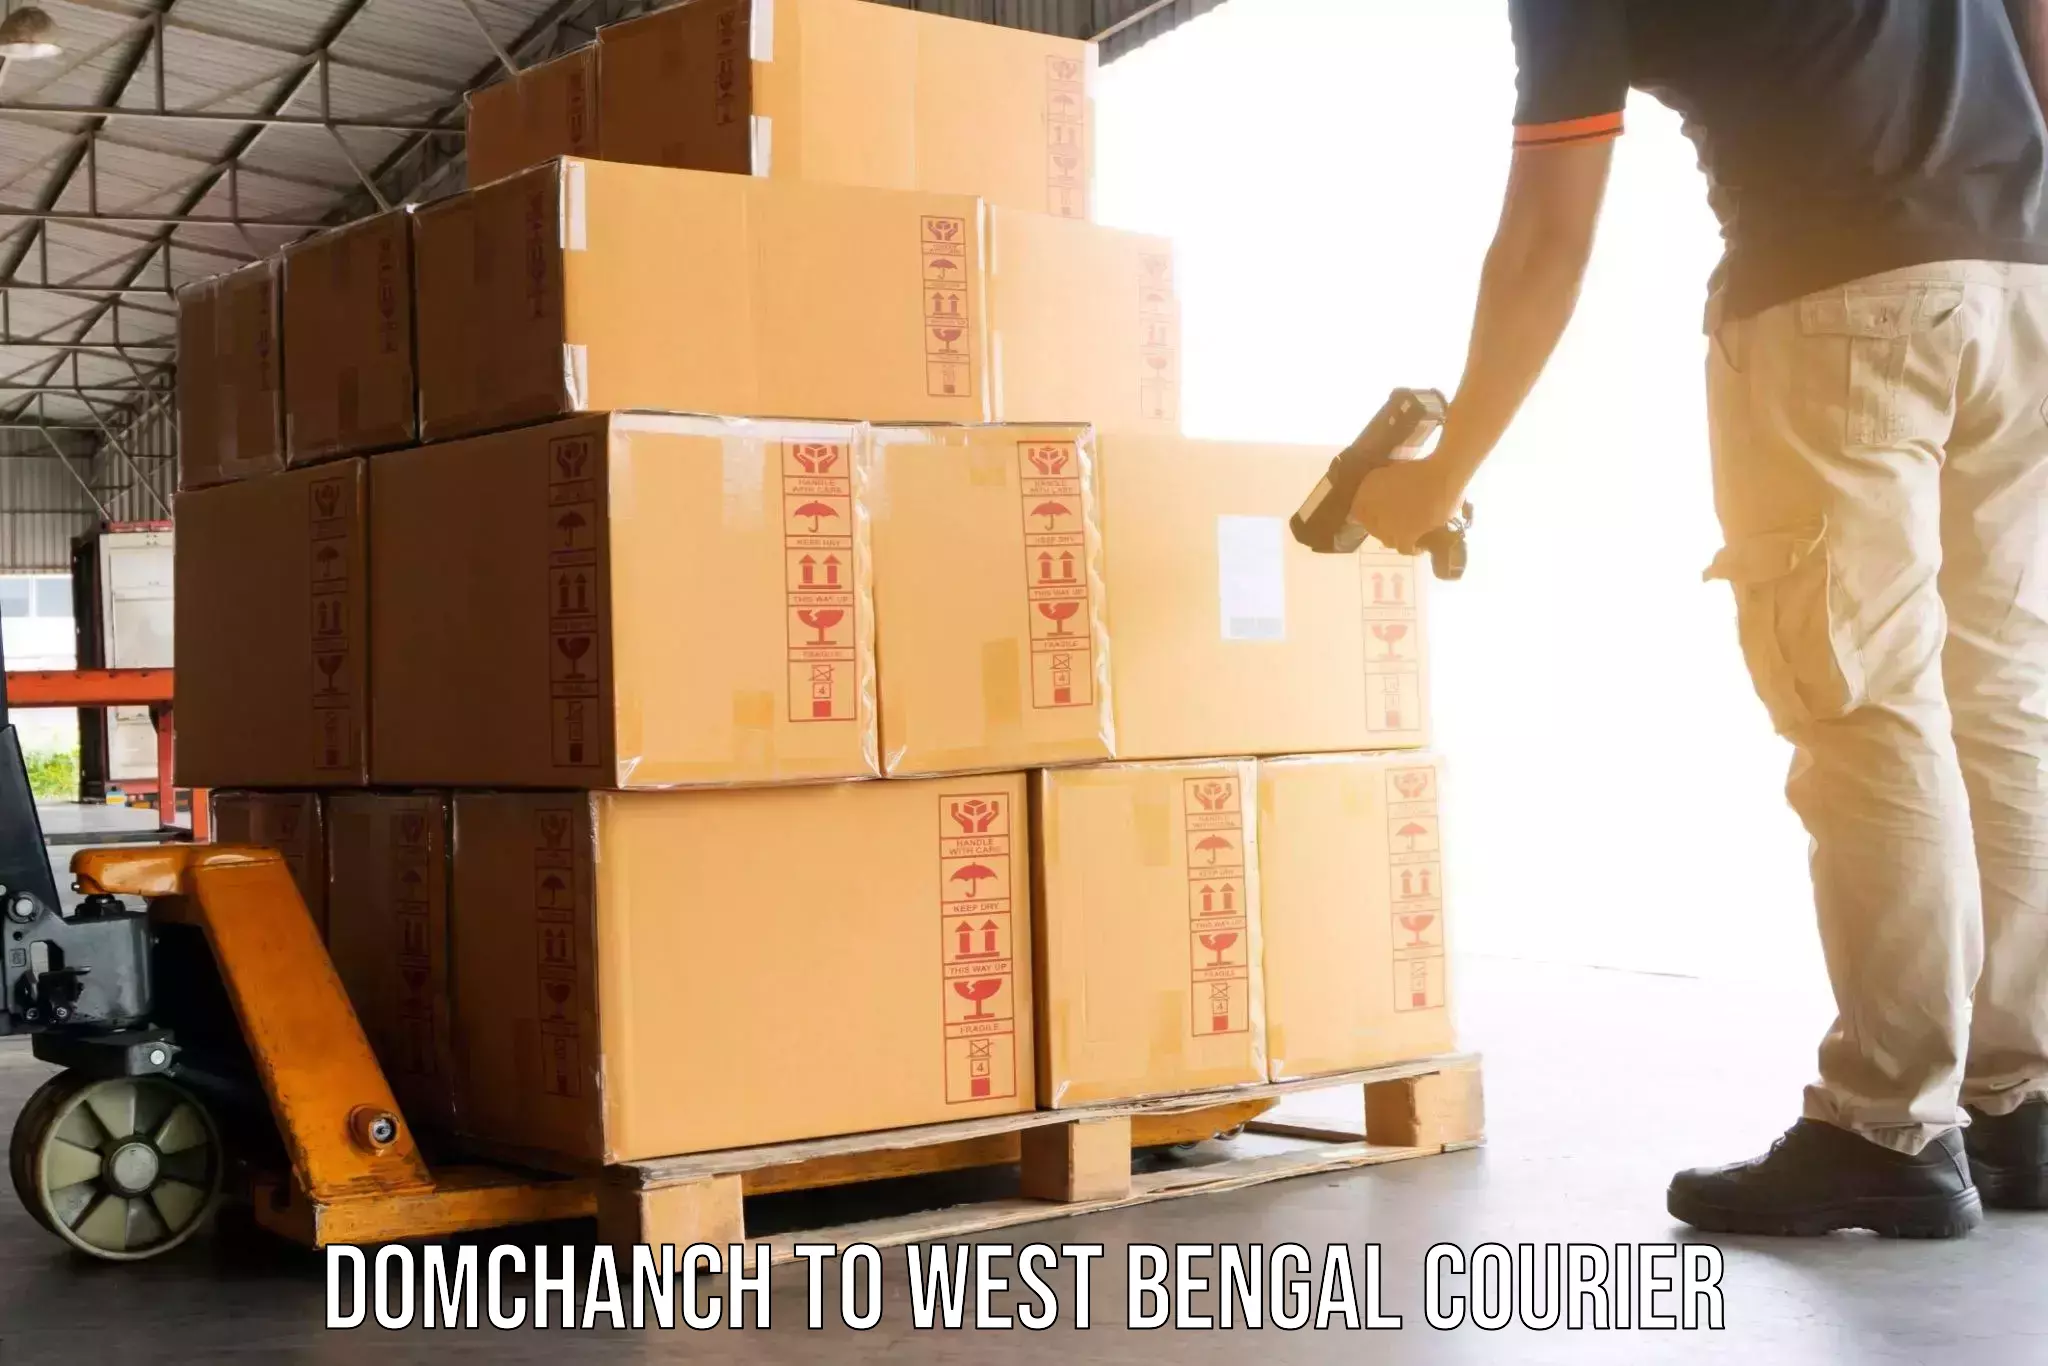 Packing and moving services in Domchanch to Diamond Harbour